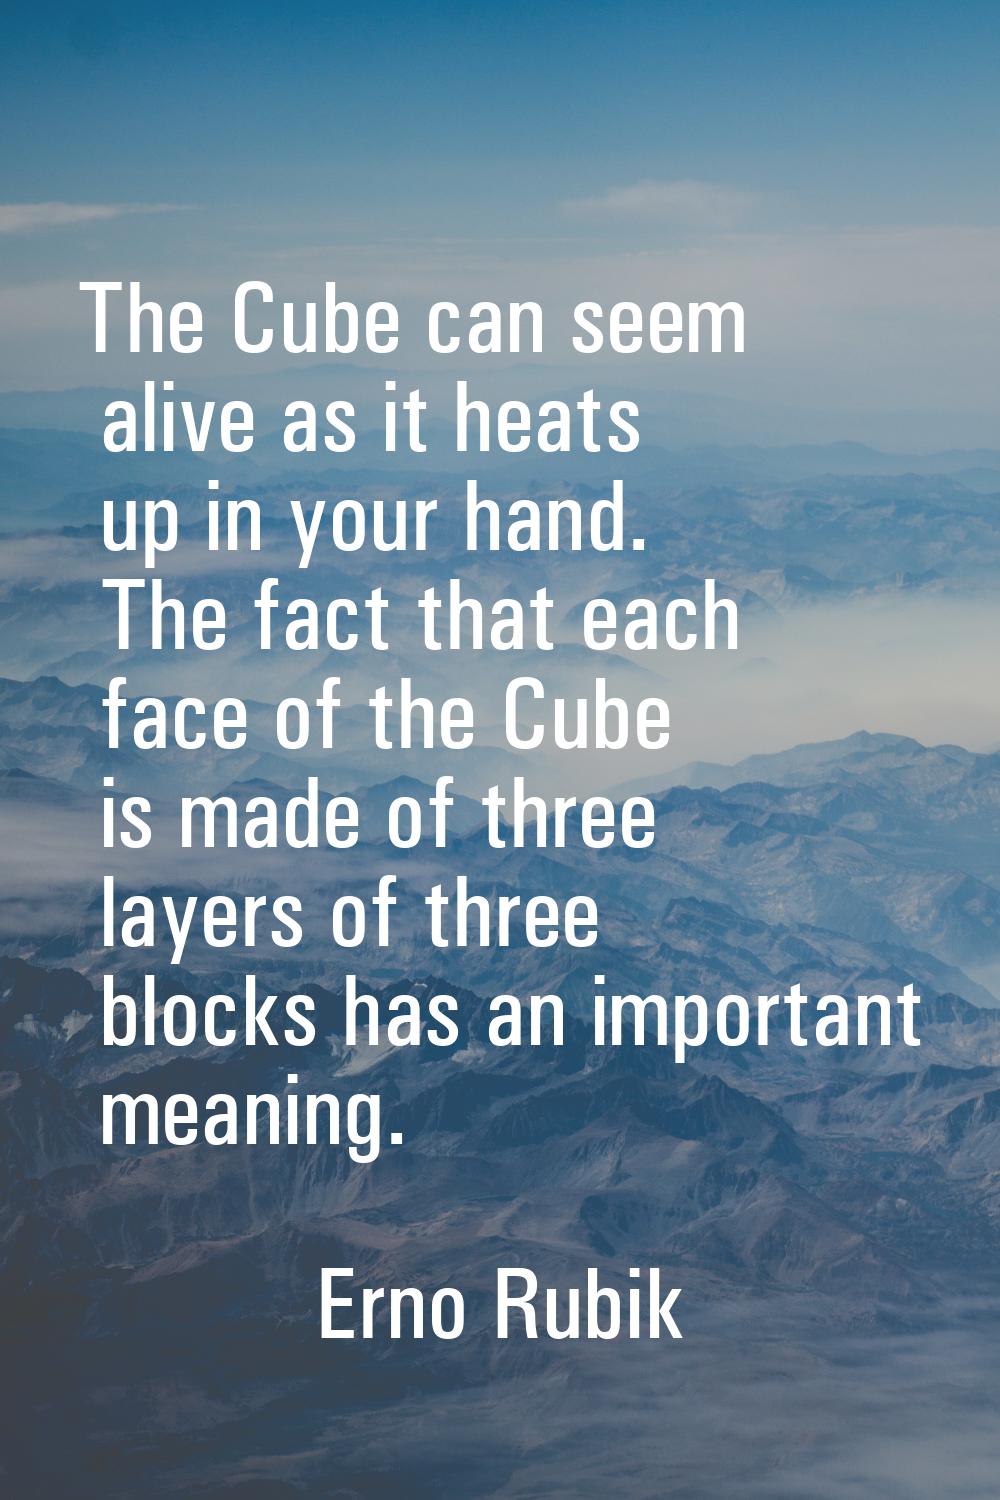 The Cube can seem alive as it heats up in your hand. The fact that each face of the Cube is made of